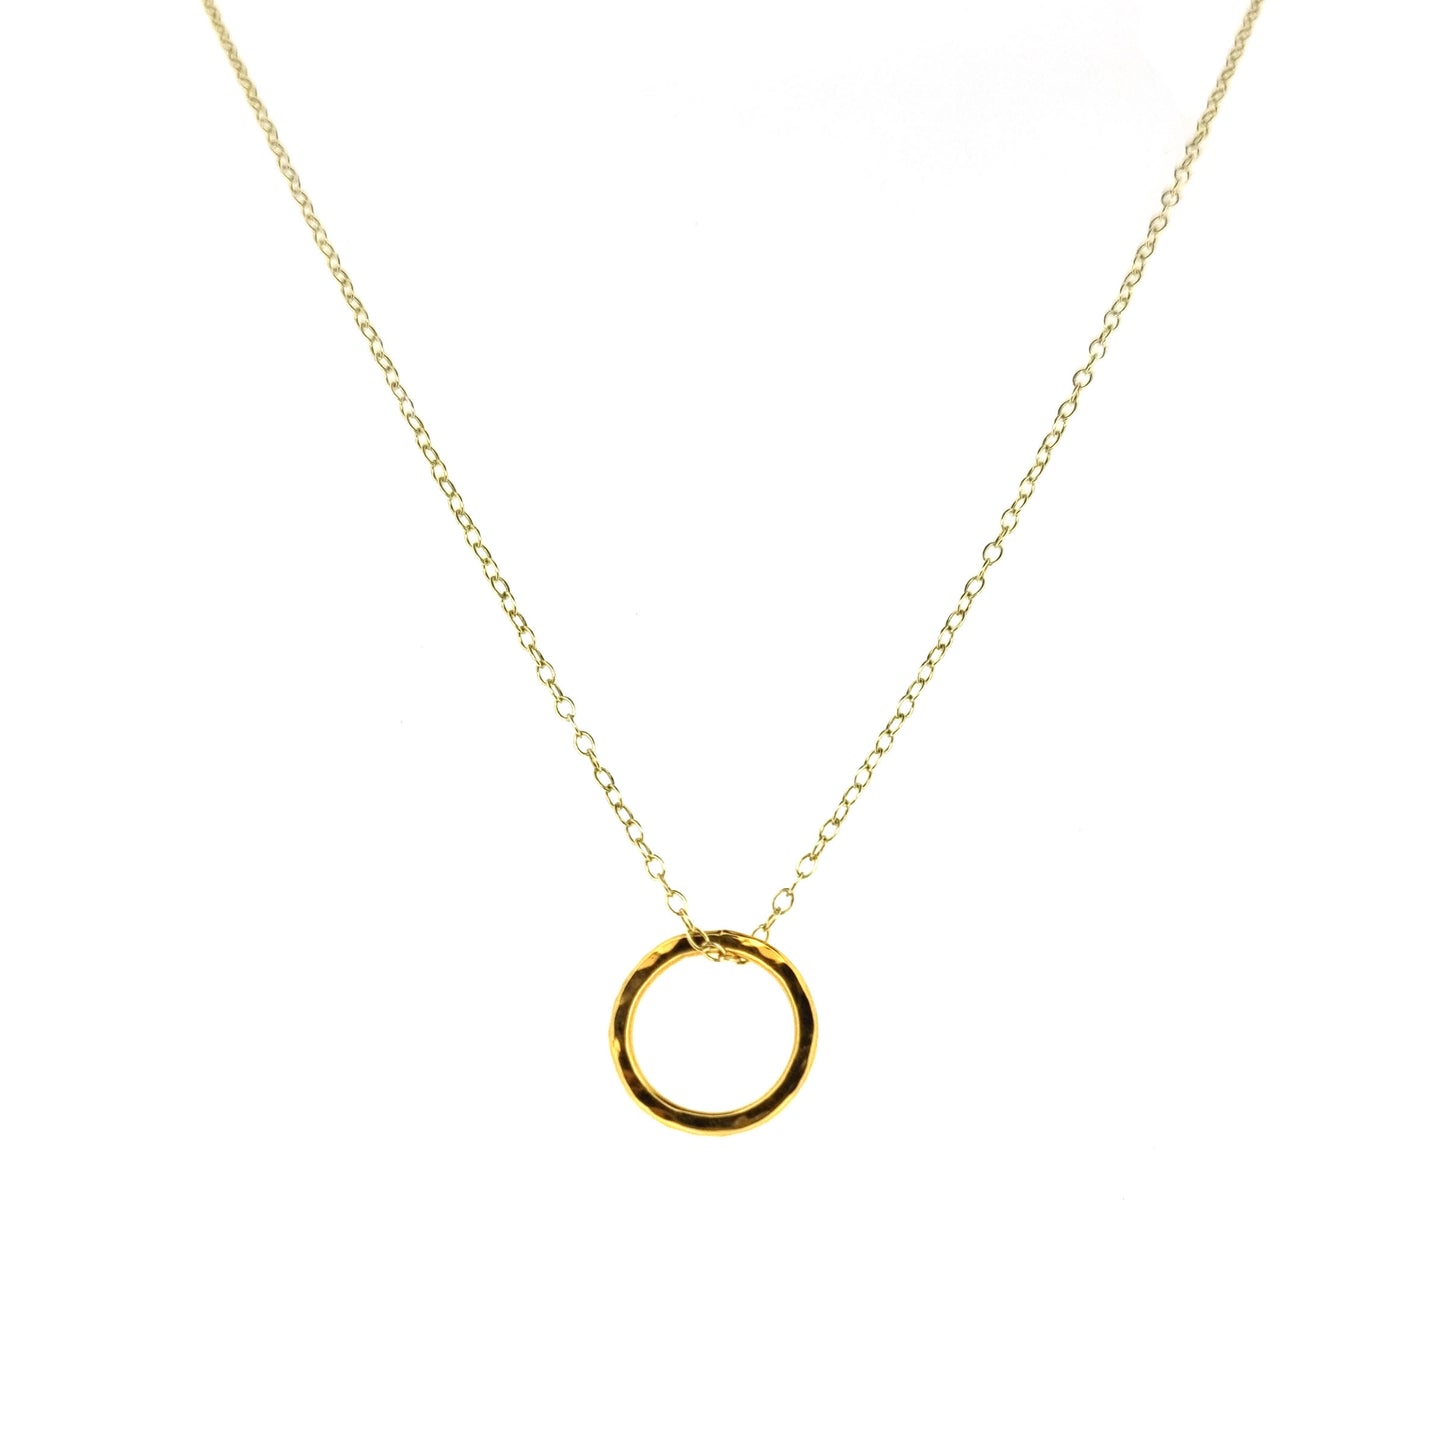 Yellow gold vermeil open circle pendant with hammered texture on a yellow gold vermeil chain. Small